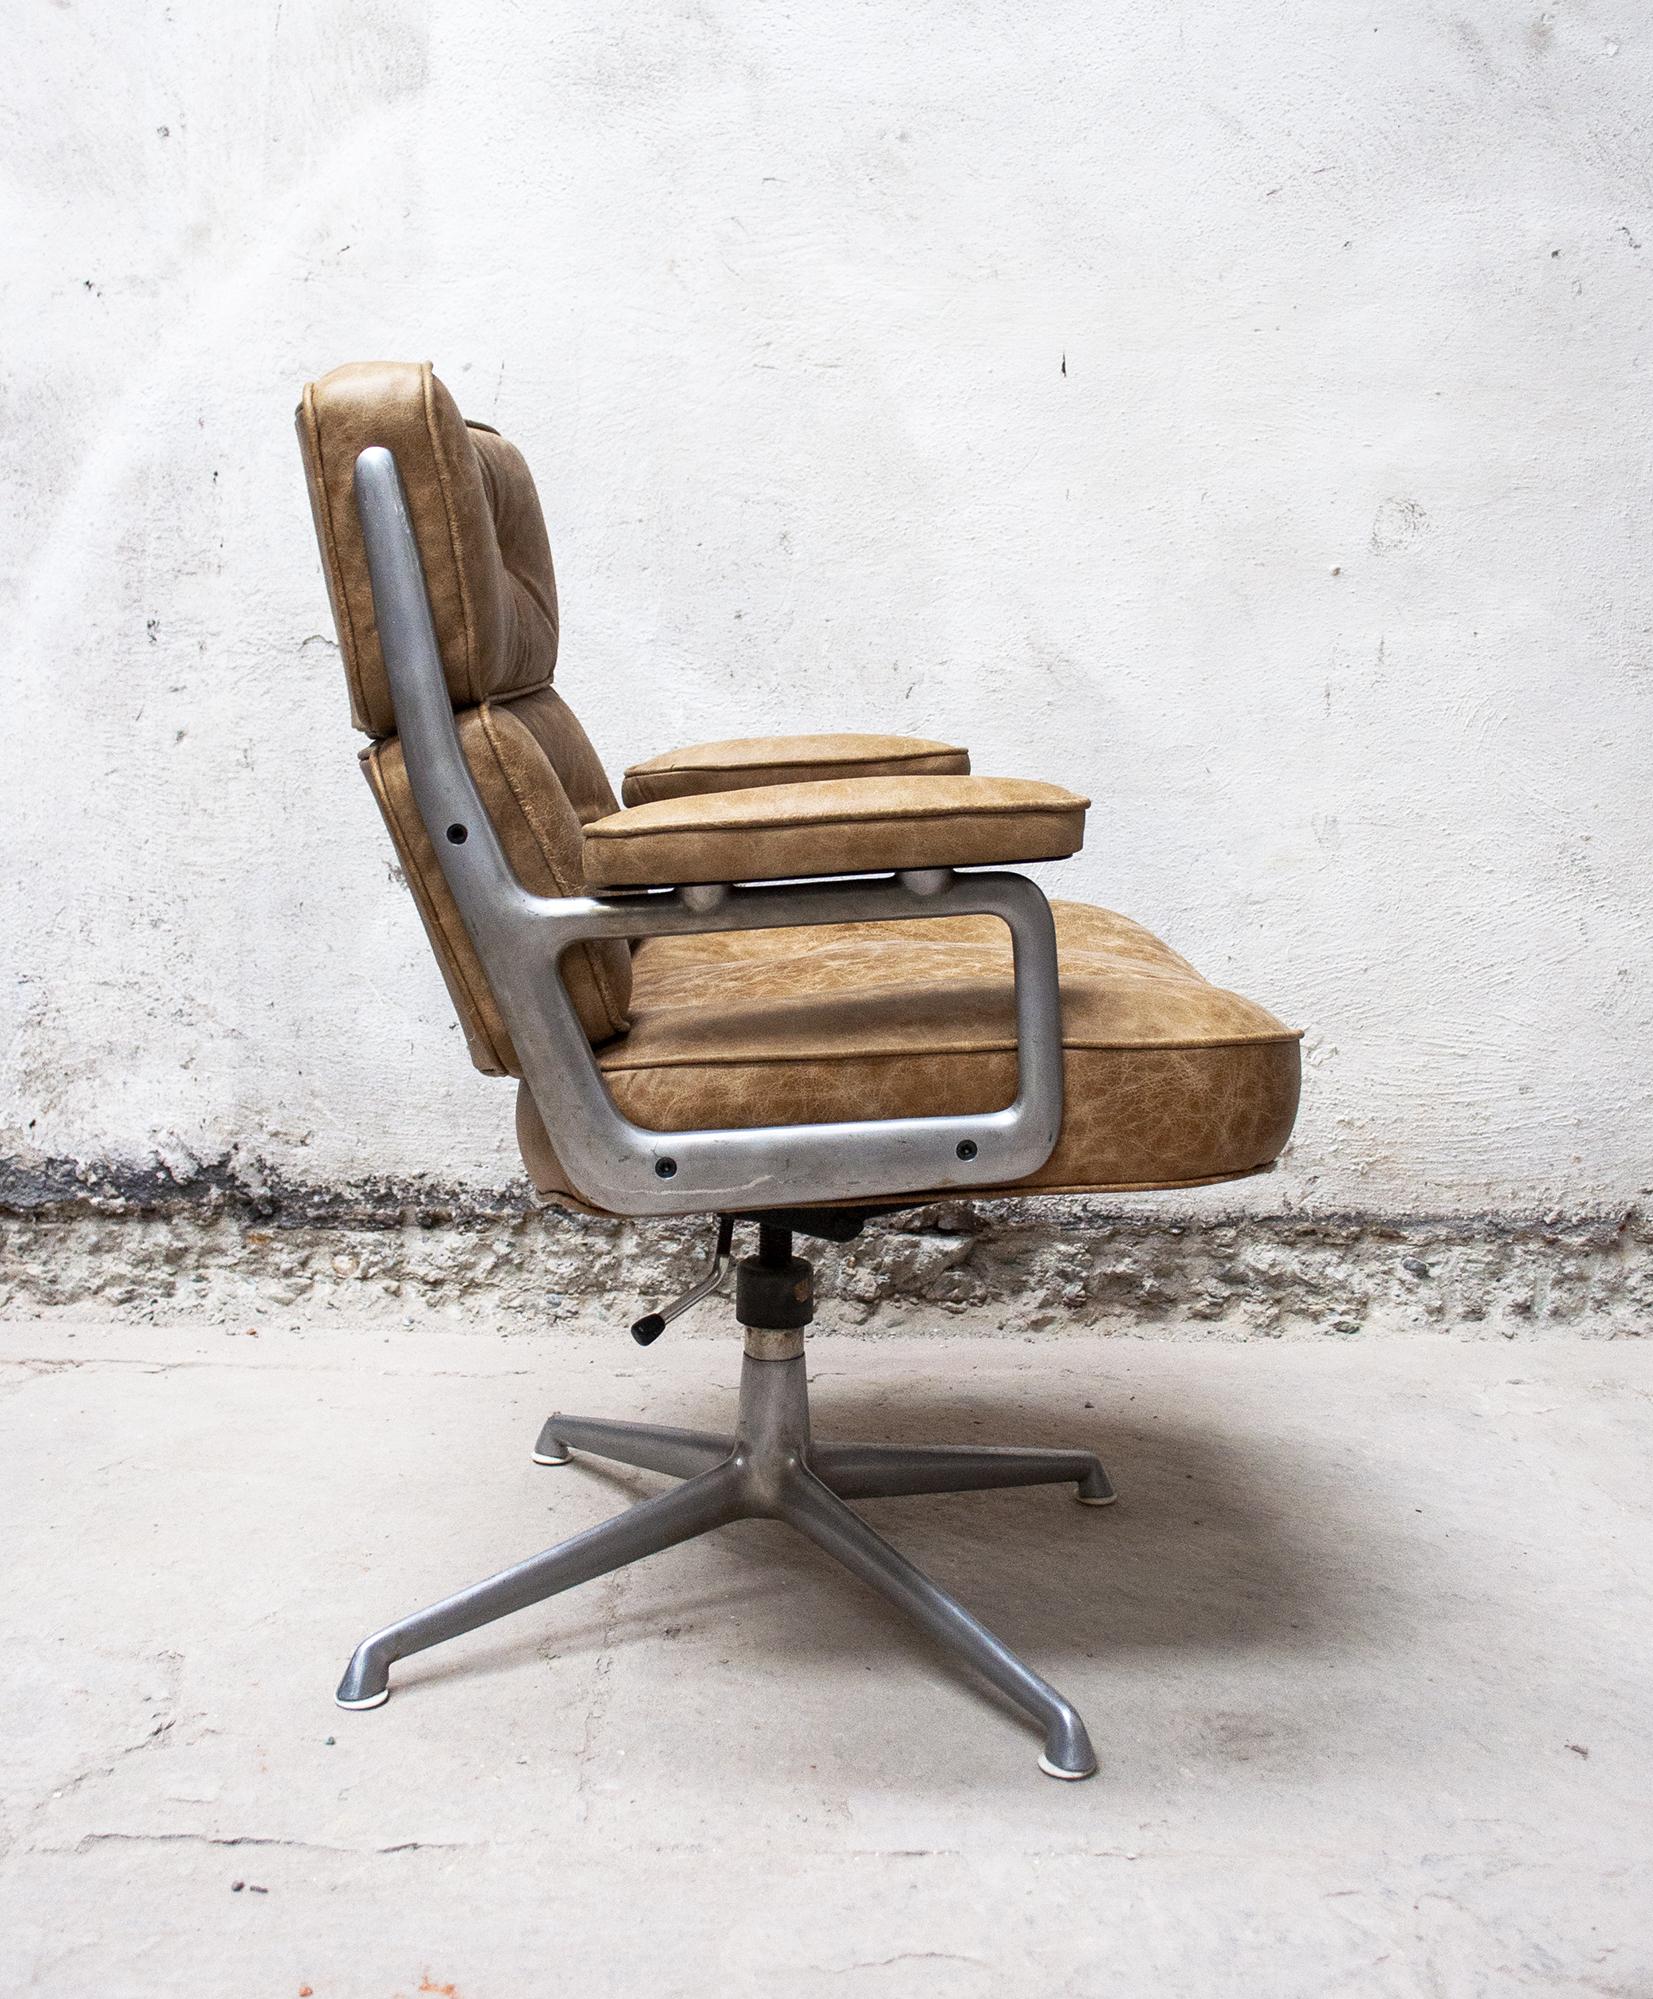 Armchair with aluminum frame and seat in sponge covered in leather.
Model ES104 lobby chair
Designer Charles & Ray Eames
Producer Herman Miller
1960s.